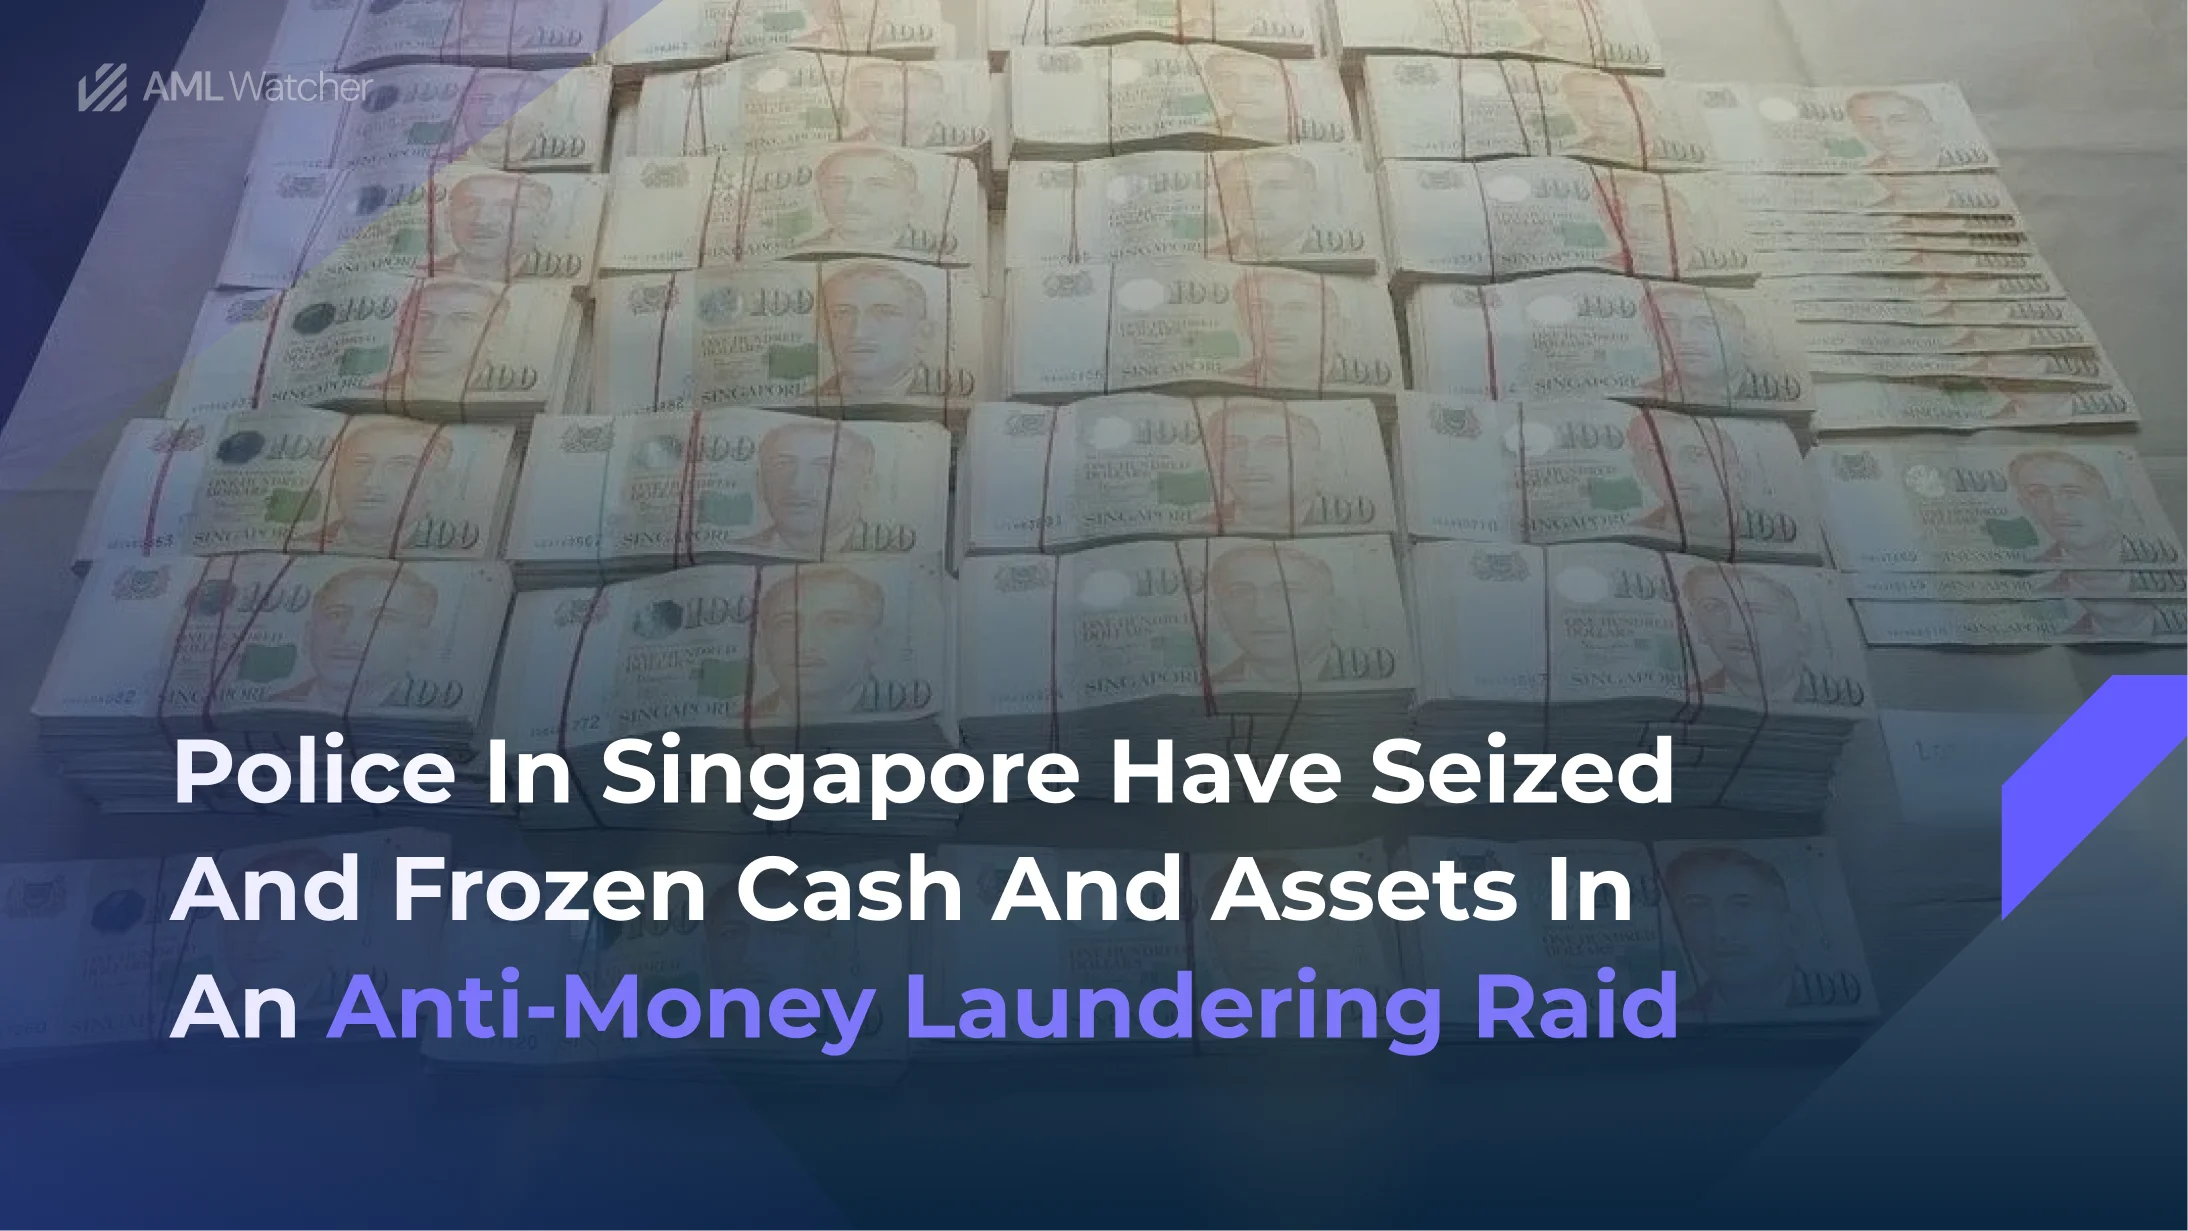 Cash and assets seized in an anti-money laundering raid.